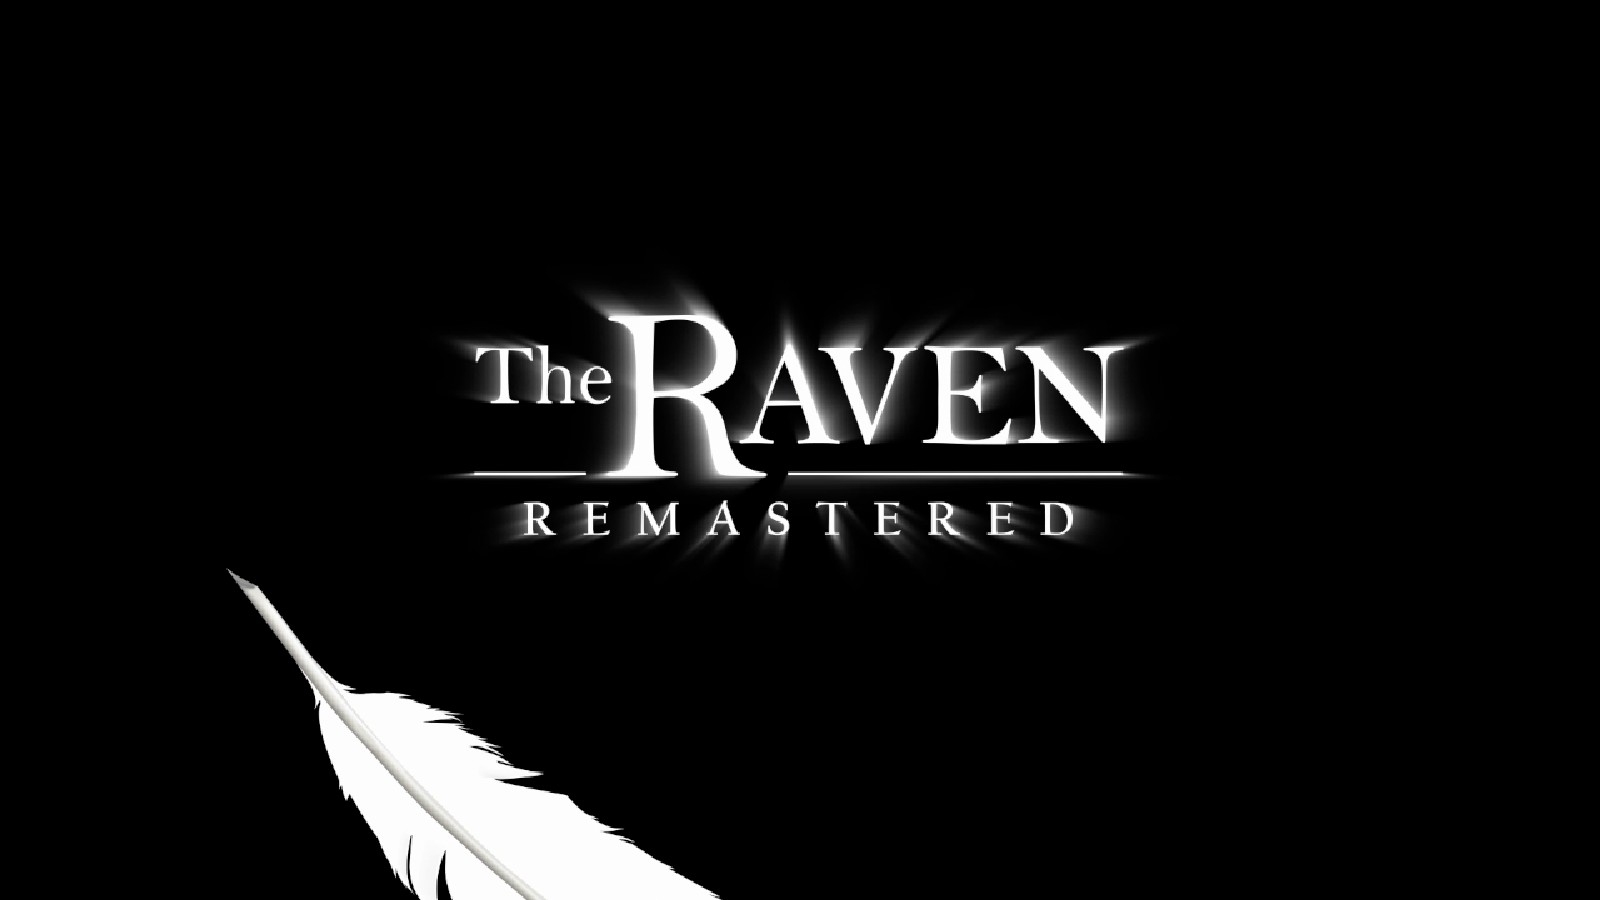 The Raven Remastered game. The Raven King обложка. Shadow of the Raven 1988 обложка. The Raven age. The ravens are the unique guardians